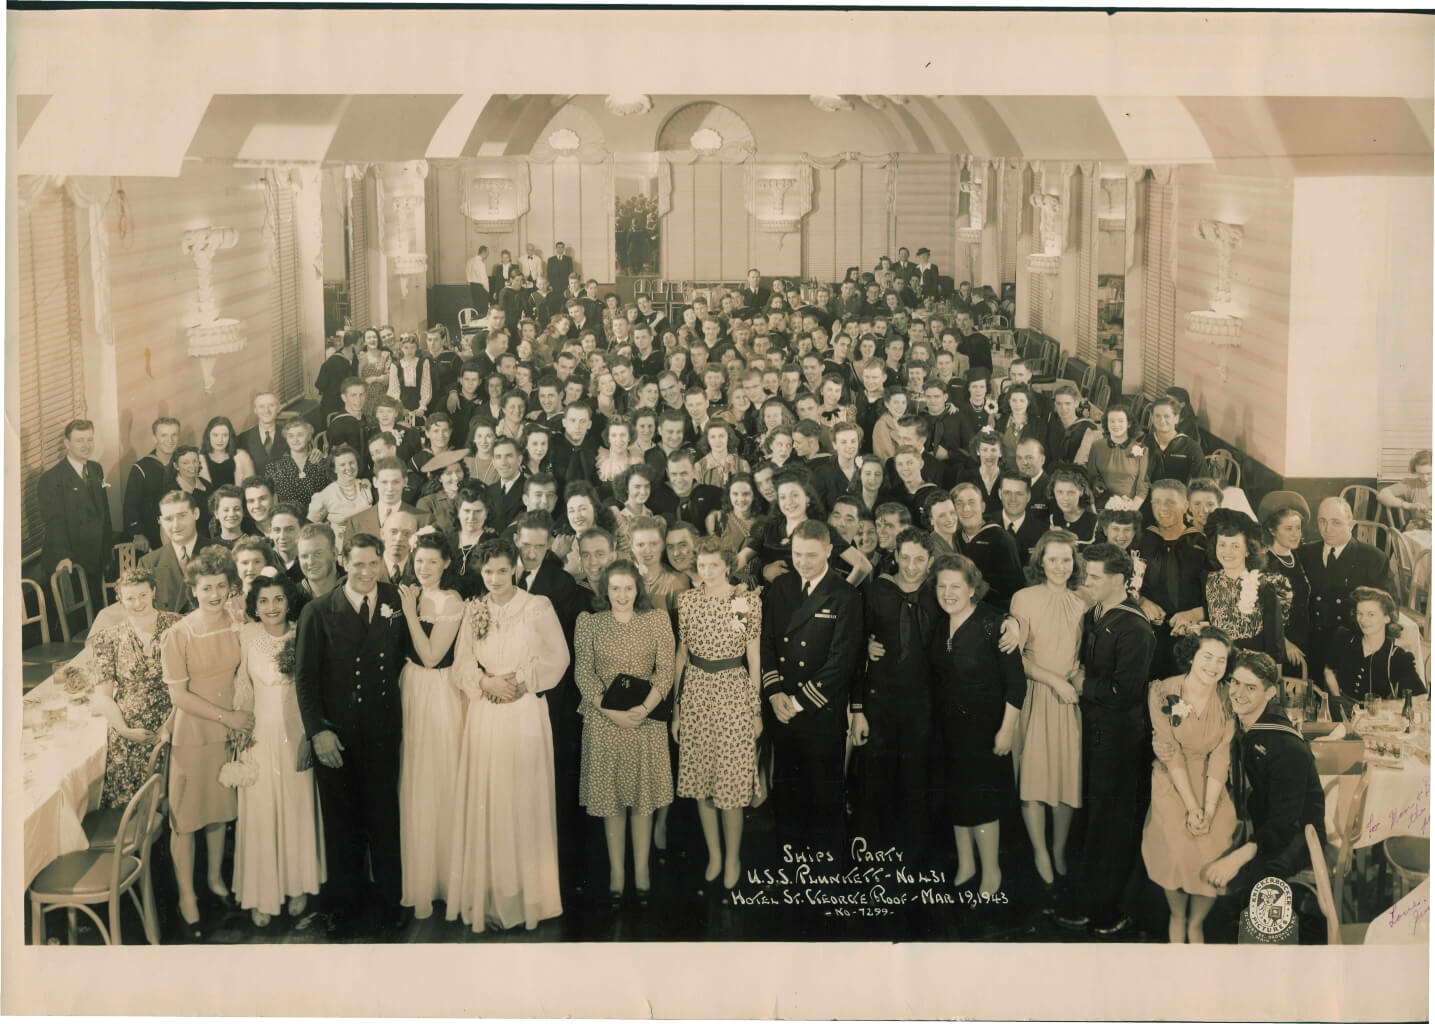 Plunkett had three parties at the Hotel St. George in Brooklyn, one in December 1942, this one on March 19, 1943 and the last one in March 1944. Captain Burke is front and center with his wife Adele. Dutch Heissler is to the left with Ginny. John Gallagher is two rows behind Burke, peeking out from behind some big hair. Jim Feltz is halfway to the rear at the far right. Irv Gebhart is four places to Jim’s right. (credit: Jim Feltz)